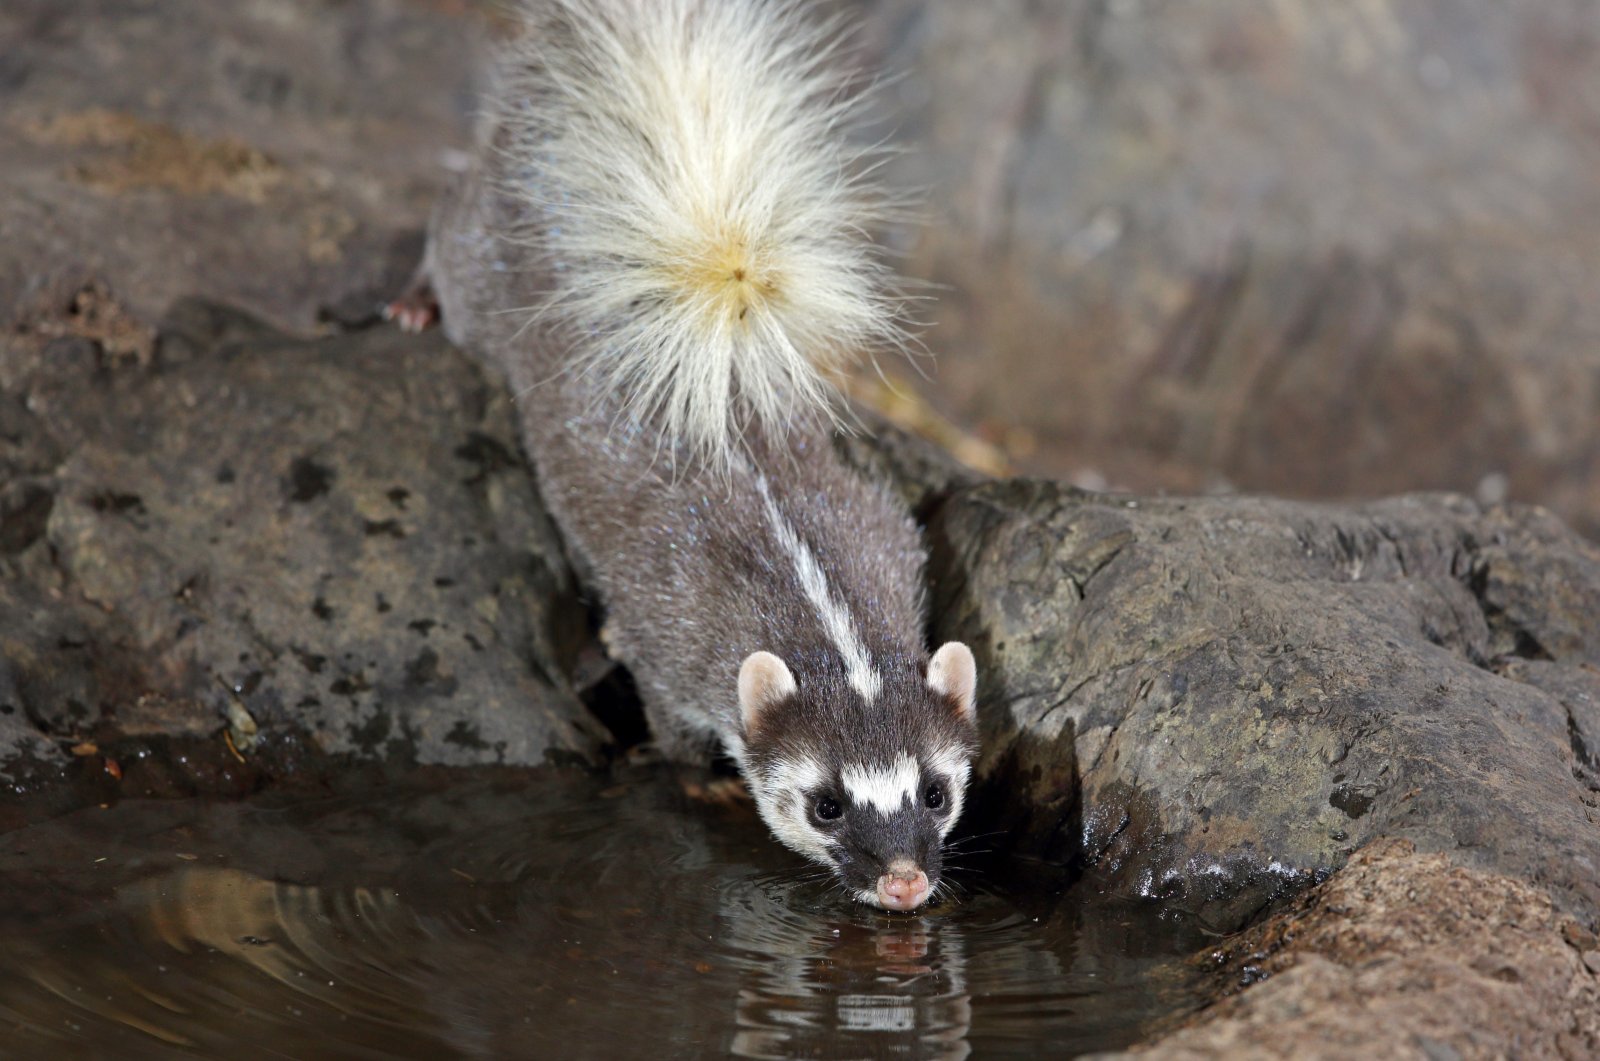 A ferret badger drinks water from a puddle. (Shutterstock Photo)